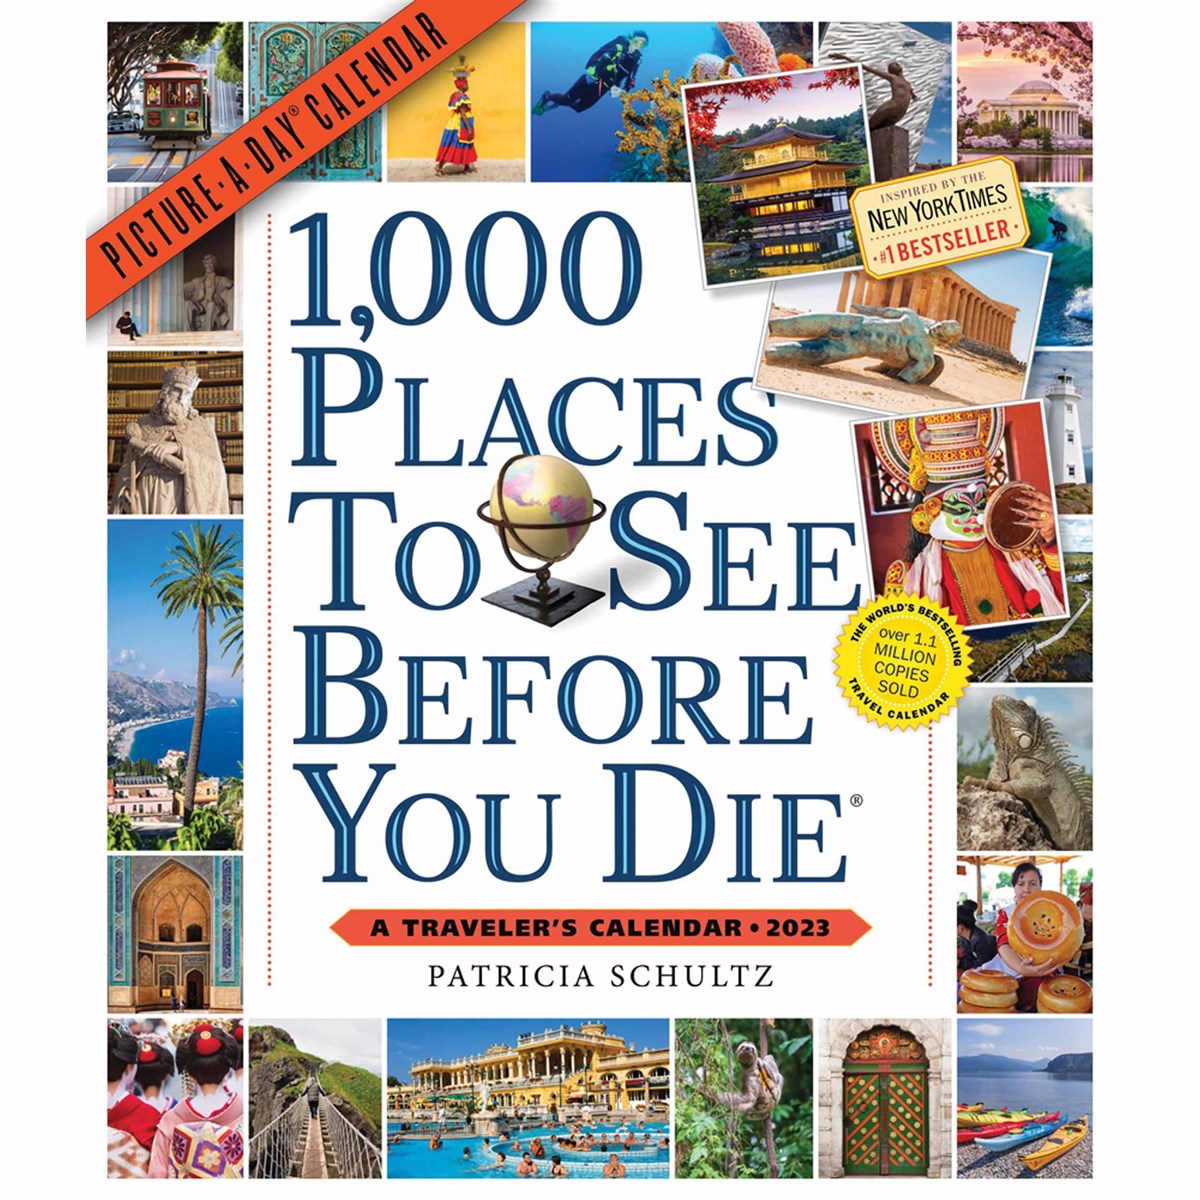 1,000 Places To See Before You Die Deluxe 2023 Calendars